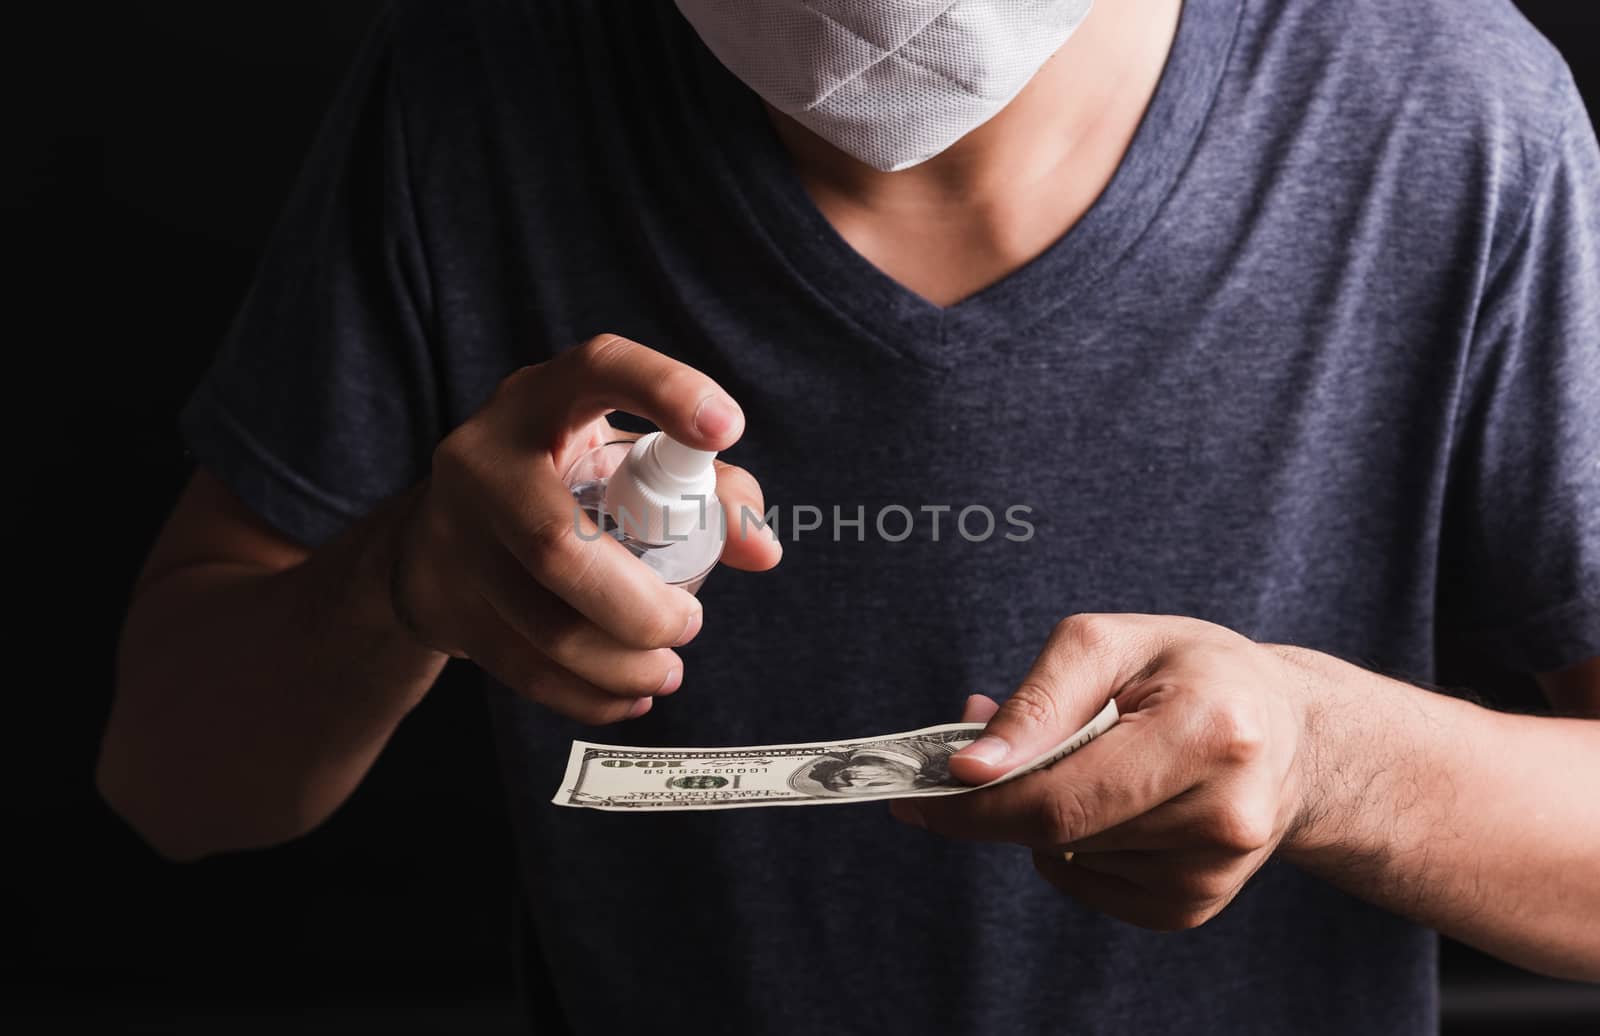 Closeup man wearing protective face mask applying sanitizer spray to 100 dollar money for cleaning, hygiene prevention COVID-19 virus or coronavirus protection concept, dark on black background